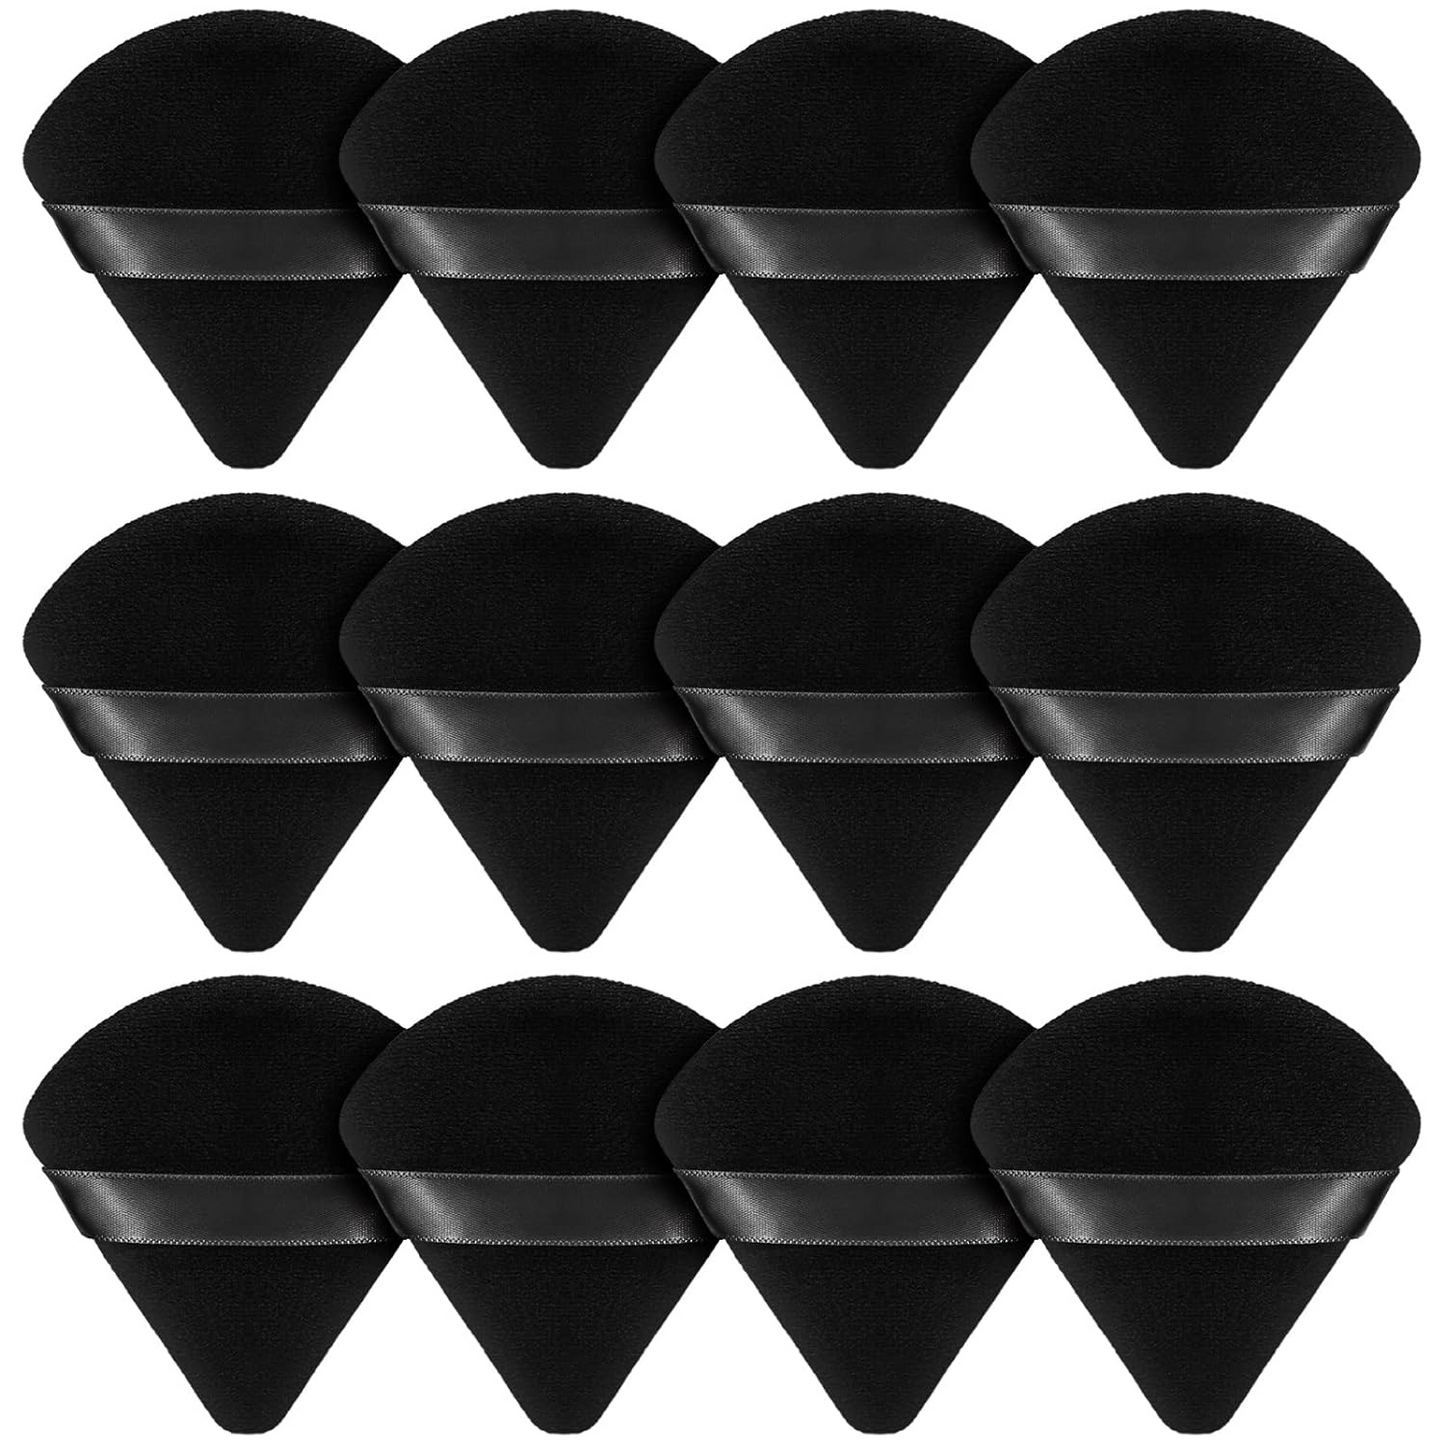 BEAKEY 12pcs Powder Puffs for Face Powder Triangle Powder Puff for Loose & Cosmetic Foundation, Makeup Puff for Contouring, Cloud Kiss Makeup Sponges Beauty Makeup Tools, Double 6 Pack Black - BEAKEY